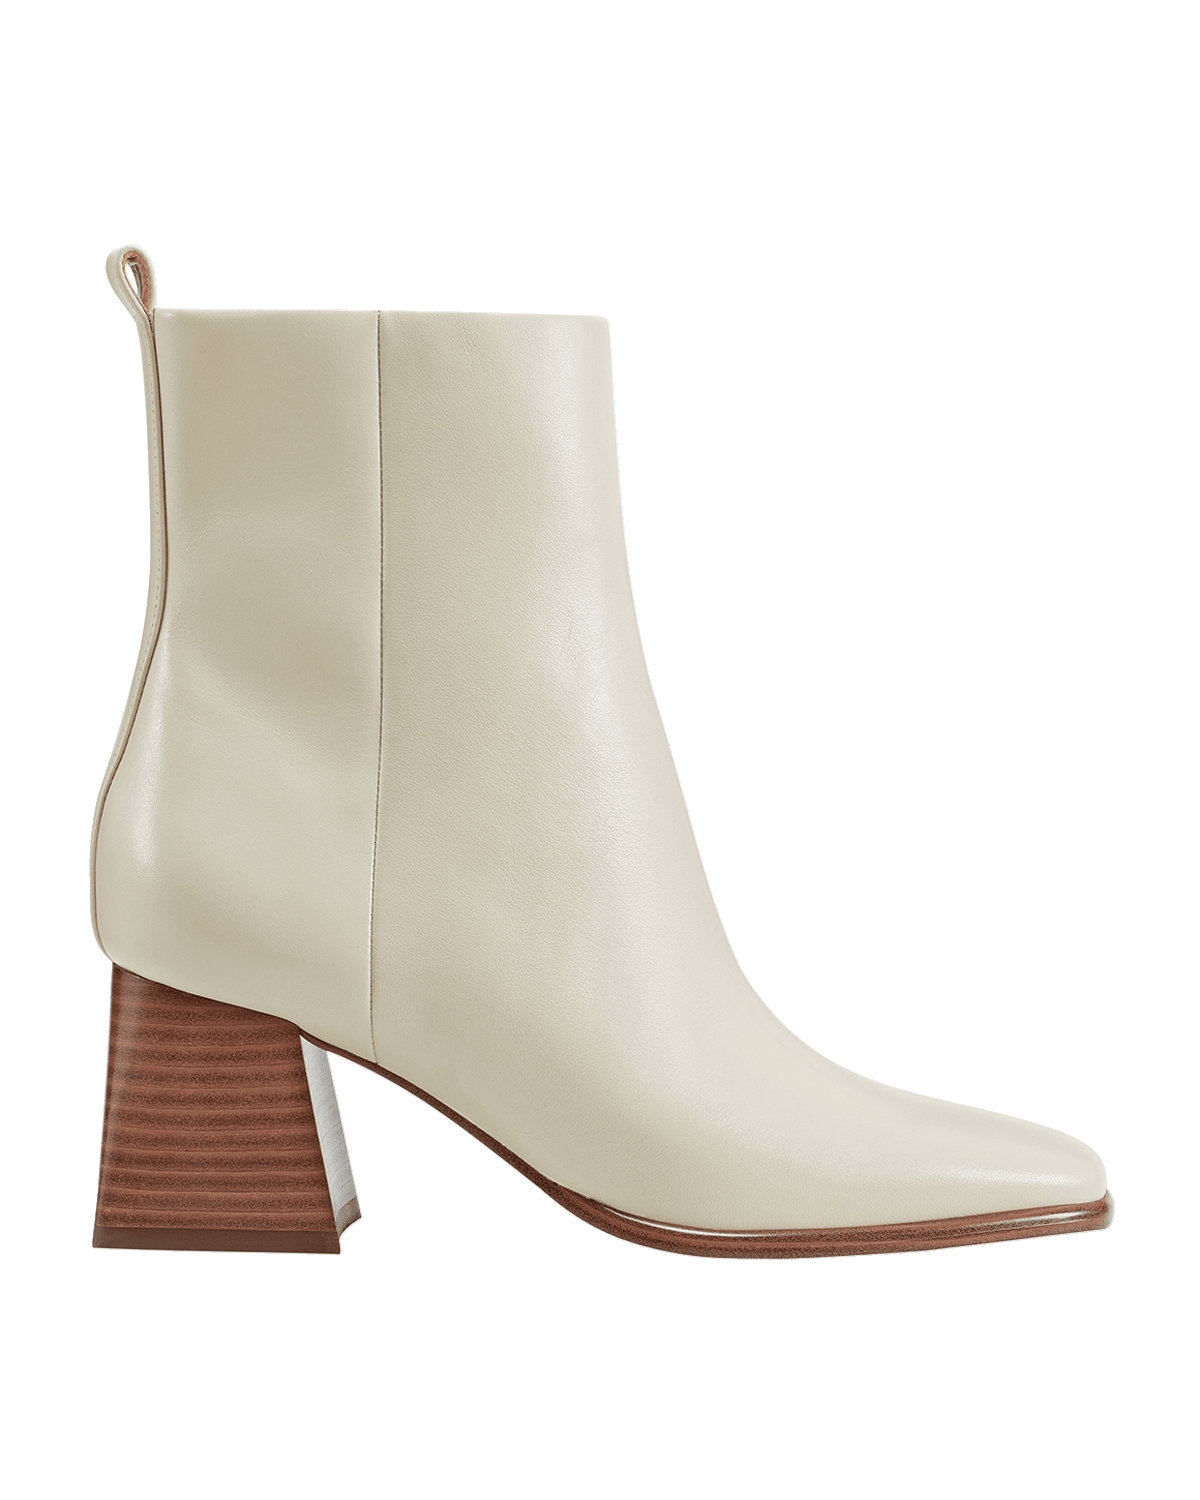 Marc Fisher LTD Hydria Leather Riding Boots | Neiman Marcus